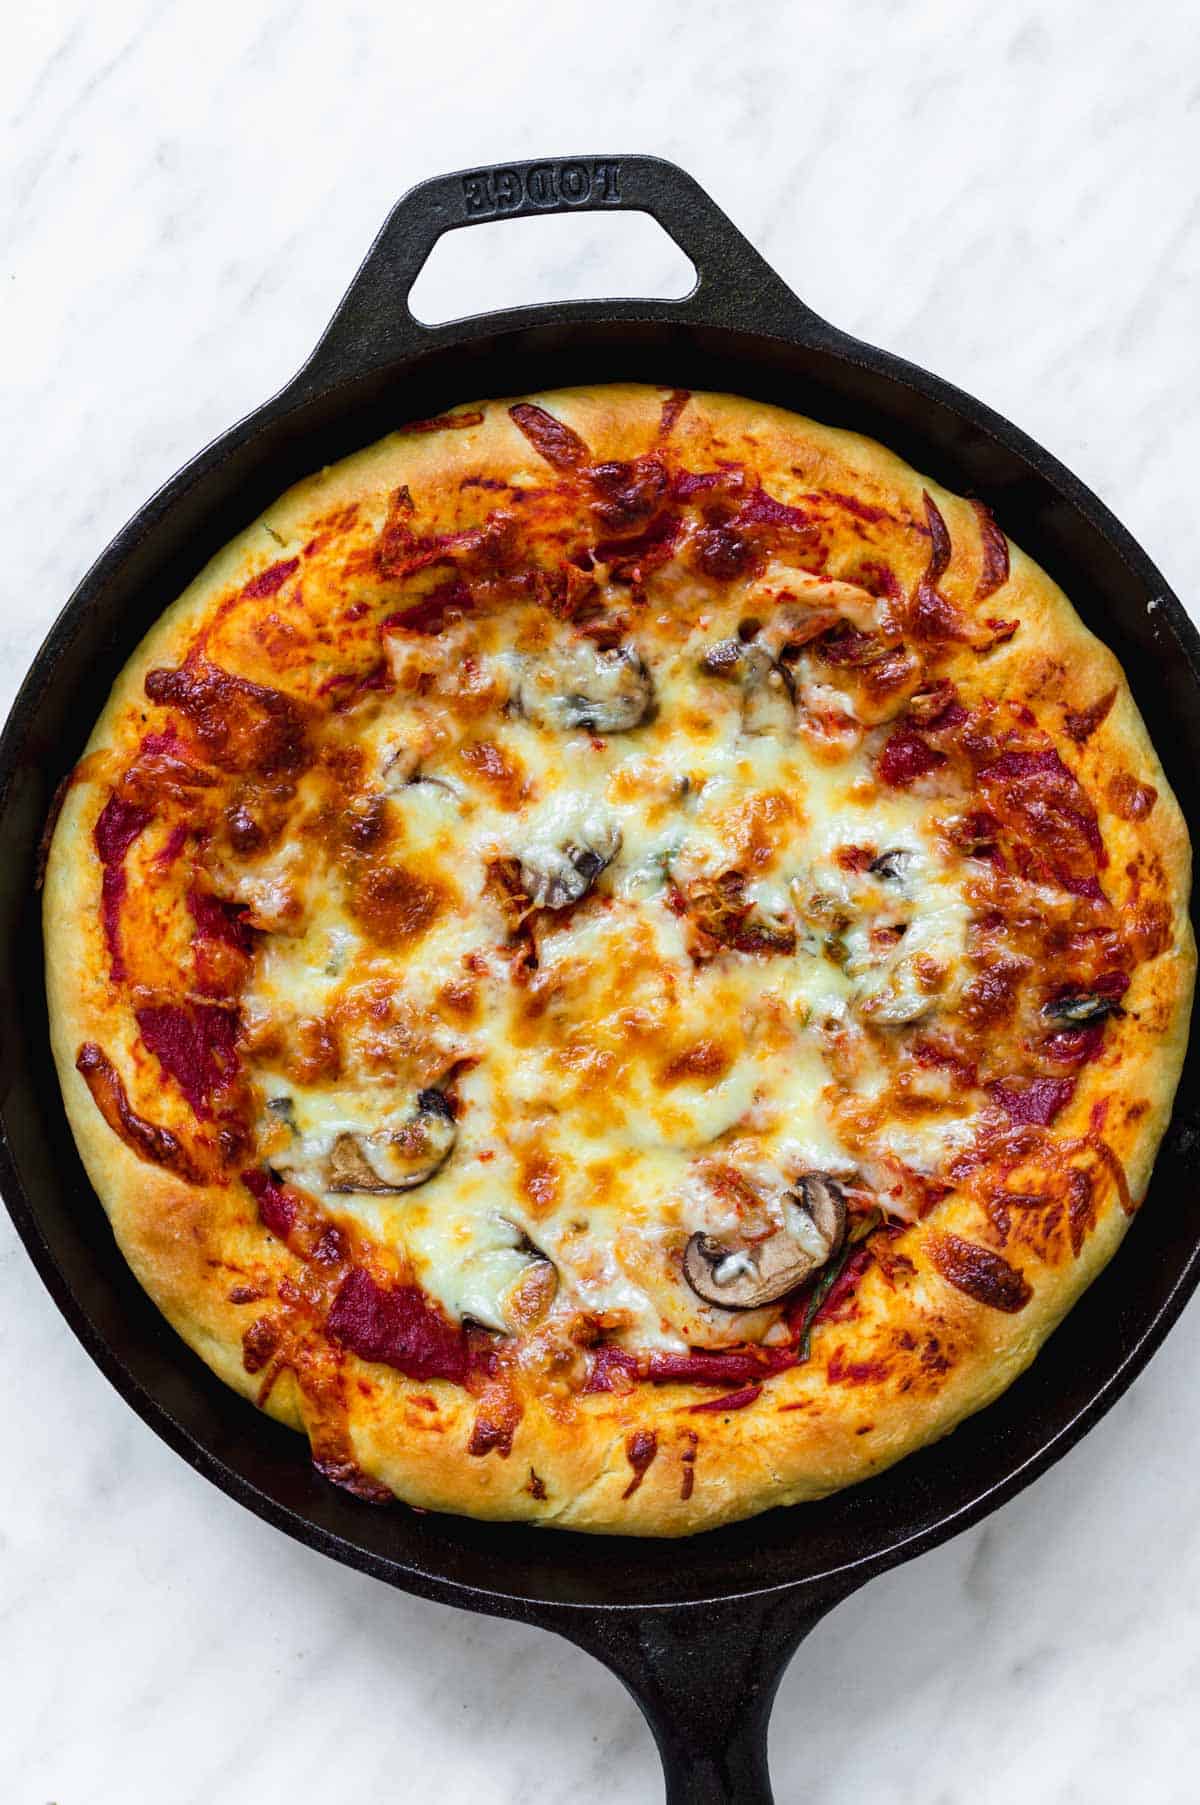 Kimchi pizza in a round iron skillet on a white background.